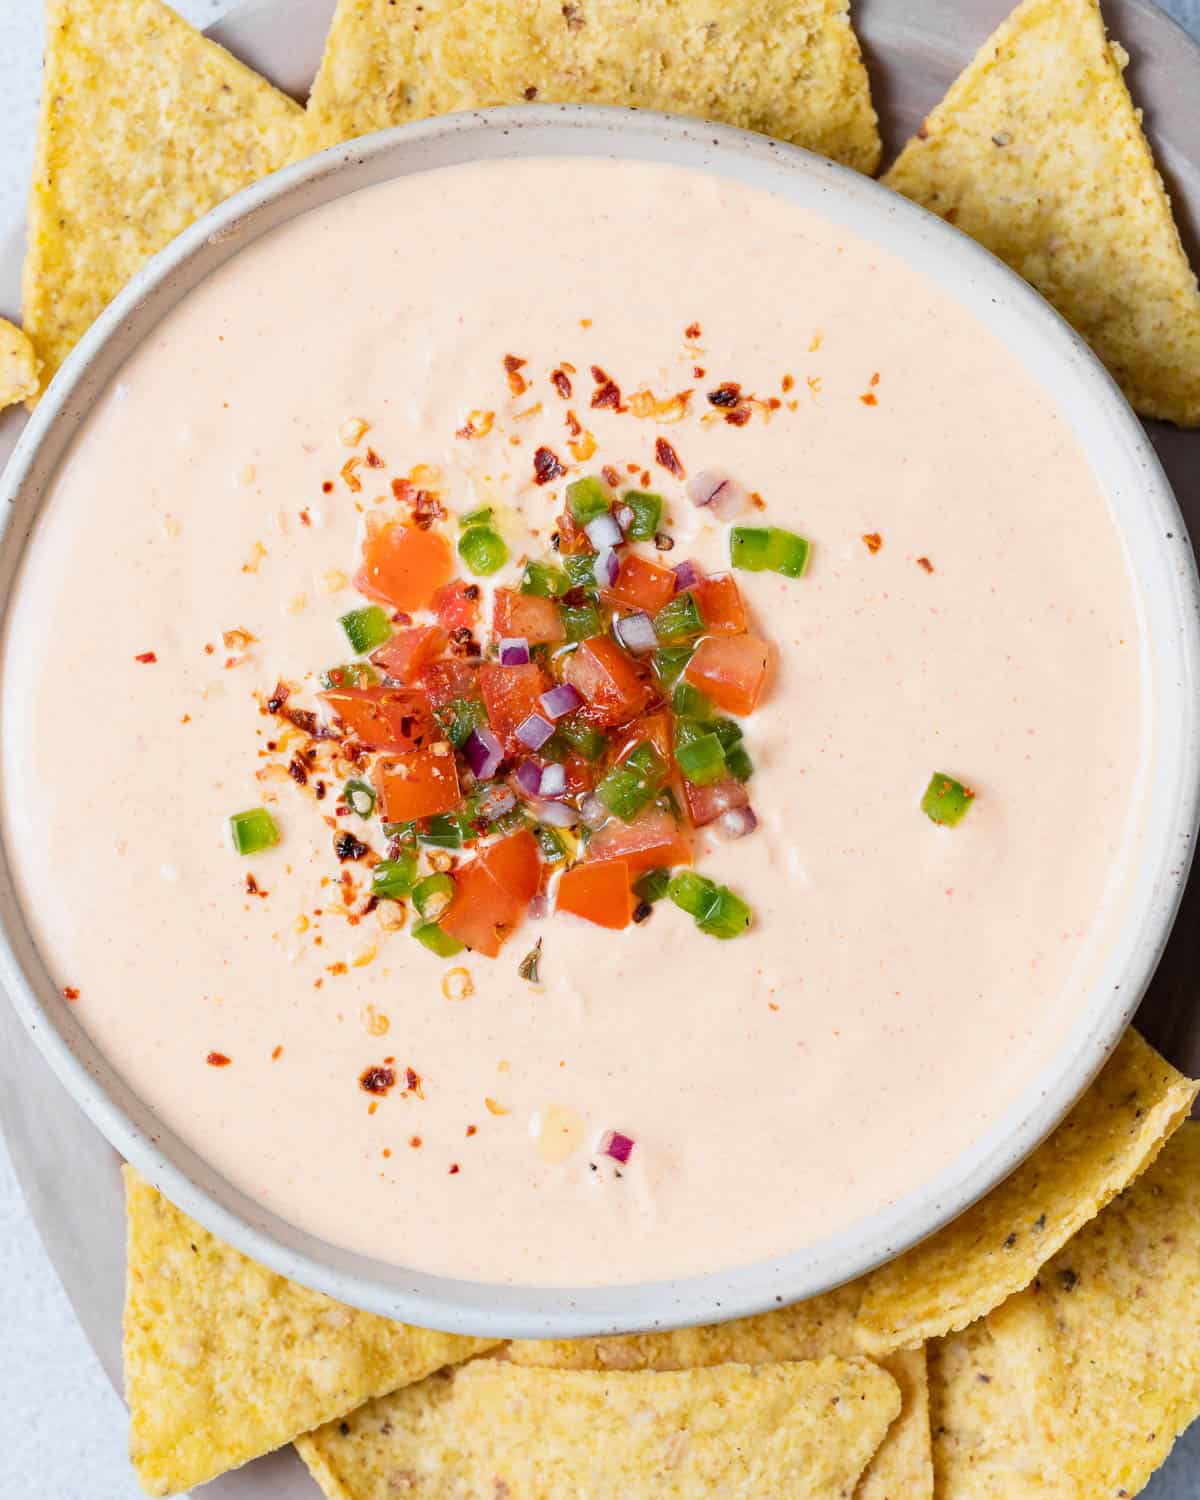 Cottage cheese queso garnished with chopped tomato and jalapeños and surrounded by tortilla chips.